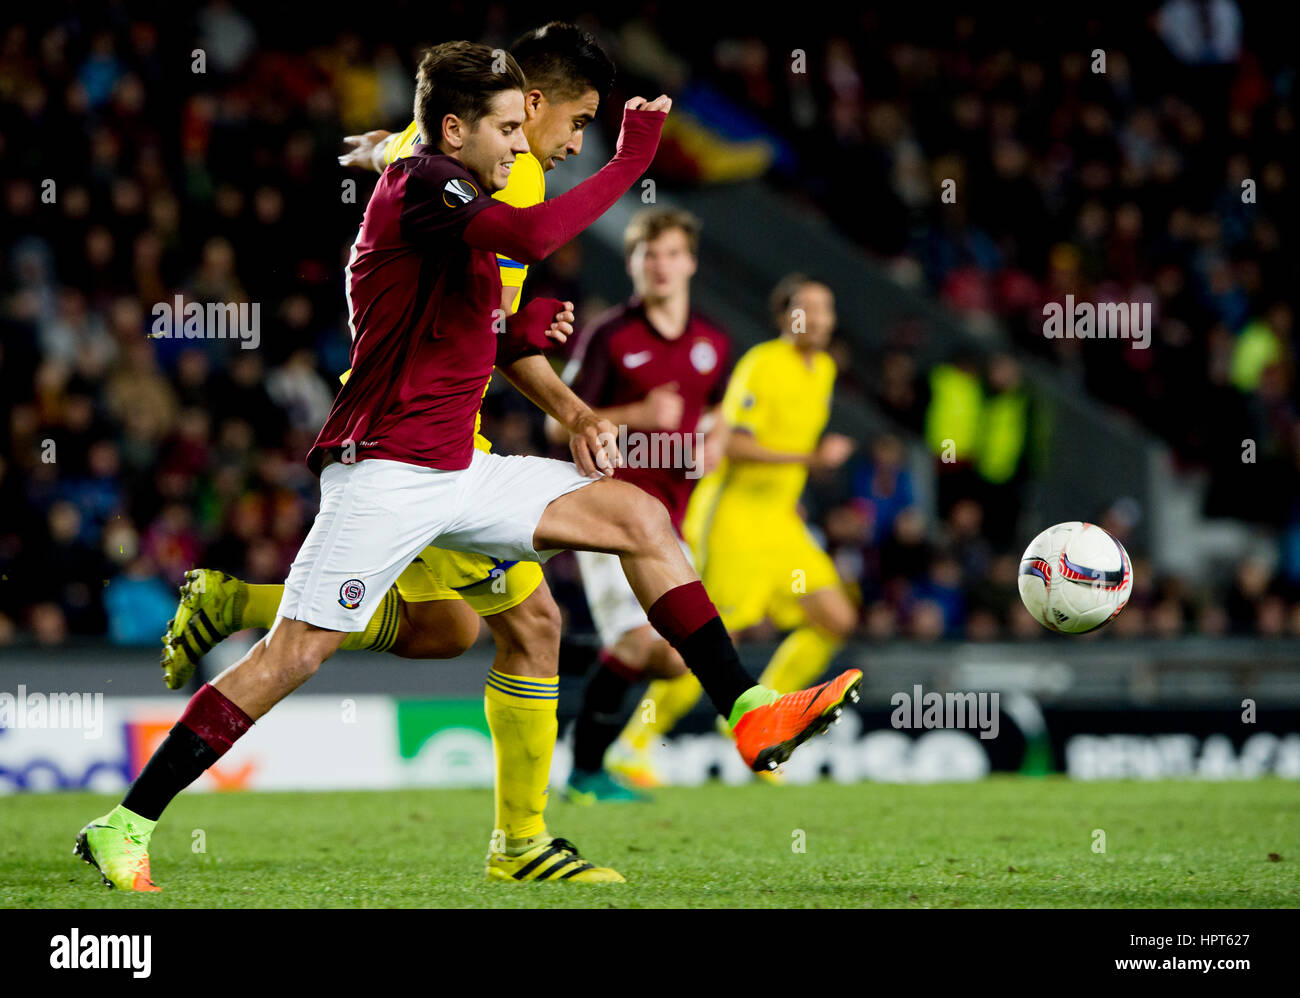 Prague, Czech Republic. 23rd Feb, 2017. Sparta's Ales Cermak, left, and Christian Noboa of Rostov in action during the Europa League round of 32 play off soccer match between AC Sparta Praha and FK Rostov in Prague, Czech Republic, on Thursday, February 23, 2017. Credit: Vit Simanek/CTK Photo/Alamy Live News Stock Photo